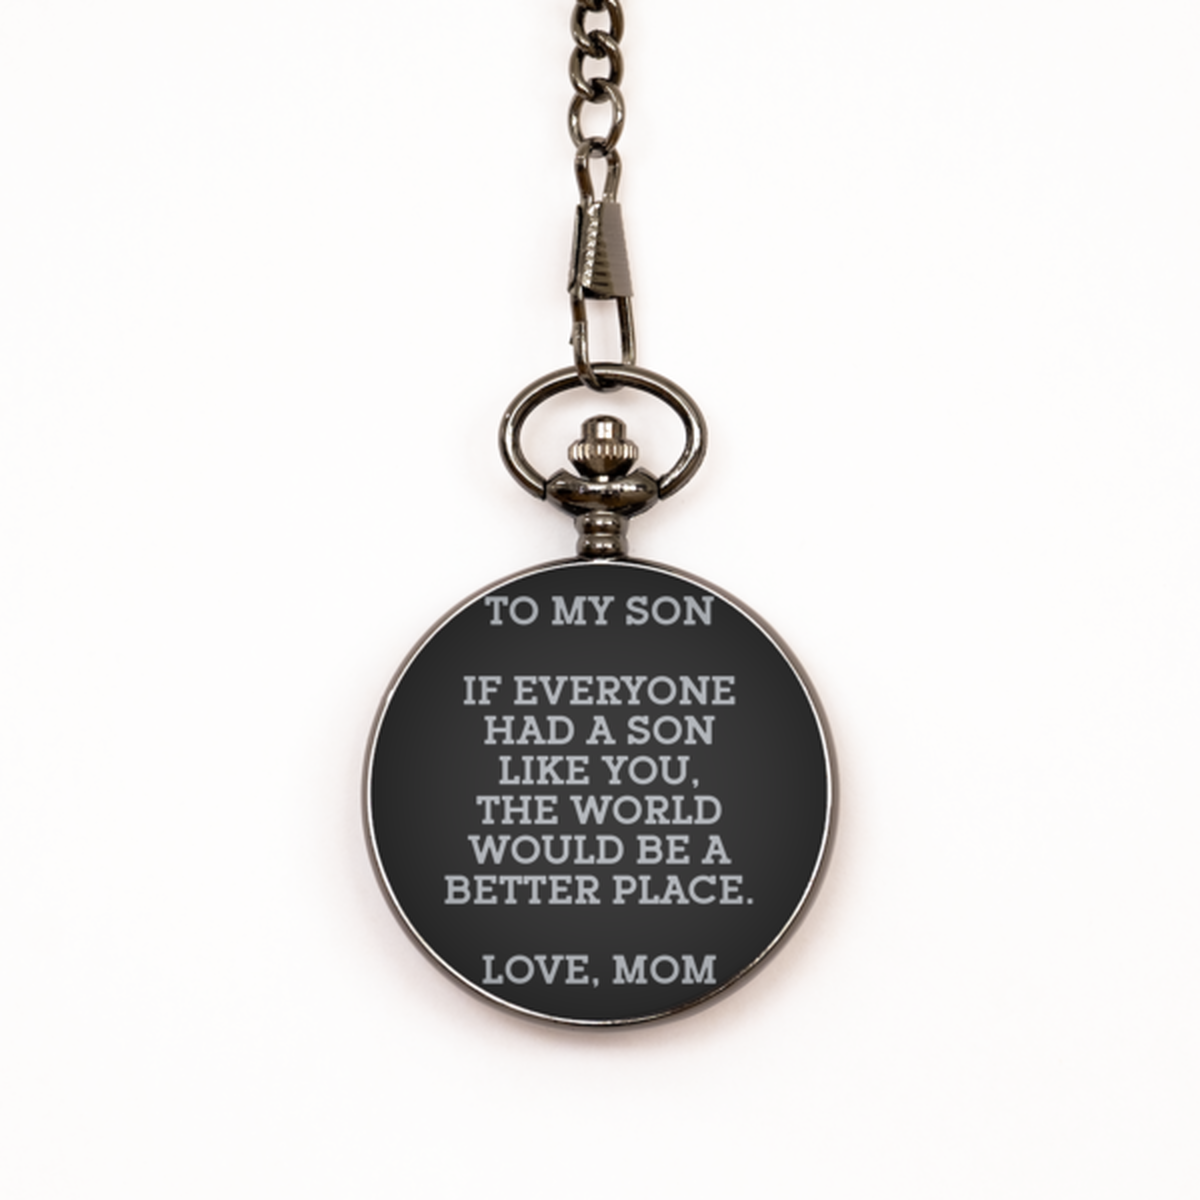 To My Son Black Pocket Watch, If Everyone Had A Son Like You, Graduation Day Gifts For Son From Mom, Birthday Gifts For Men